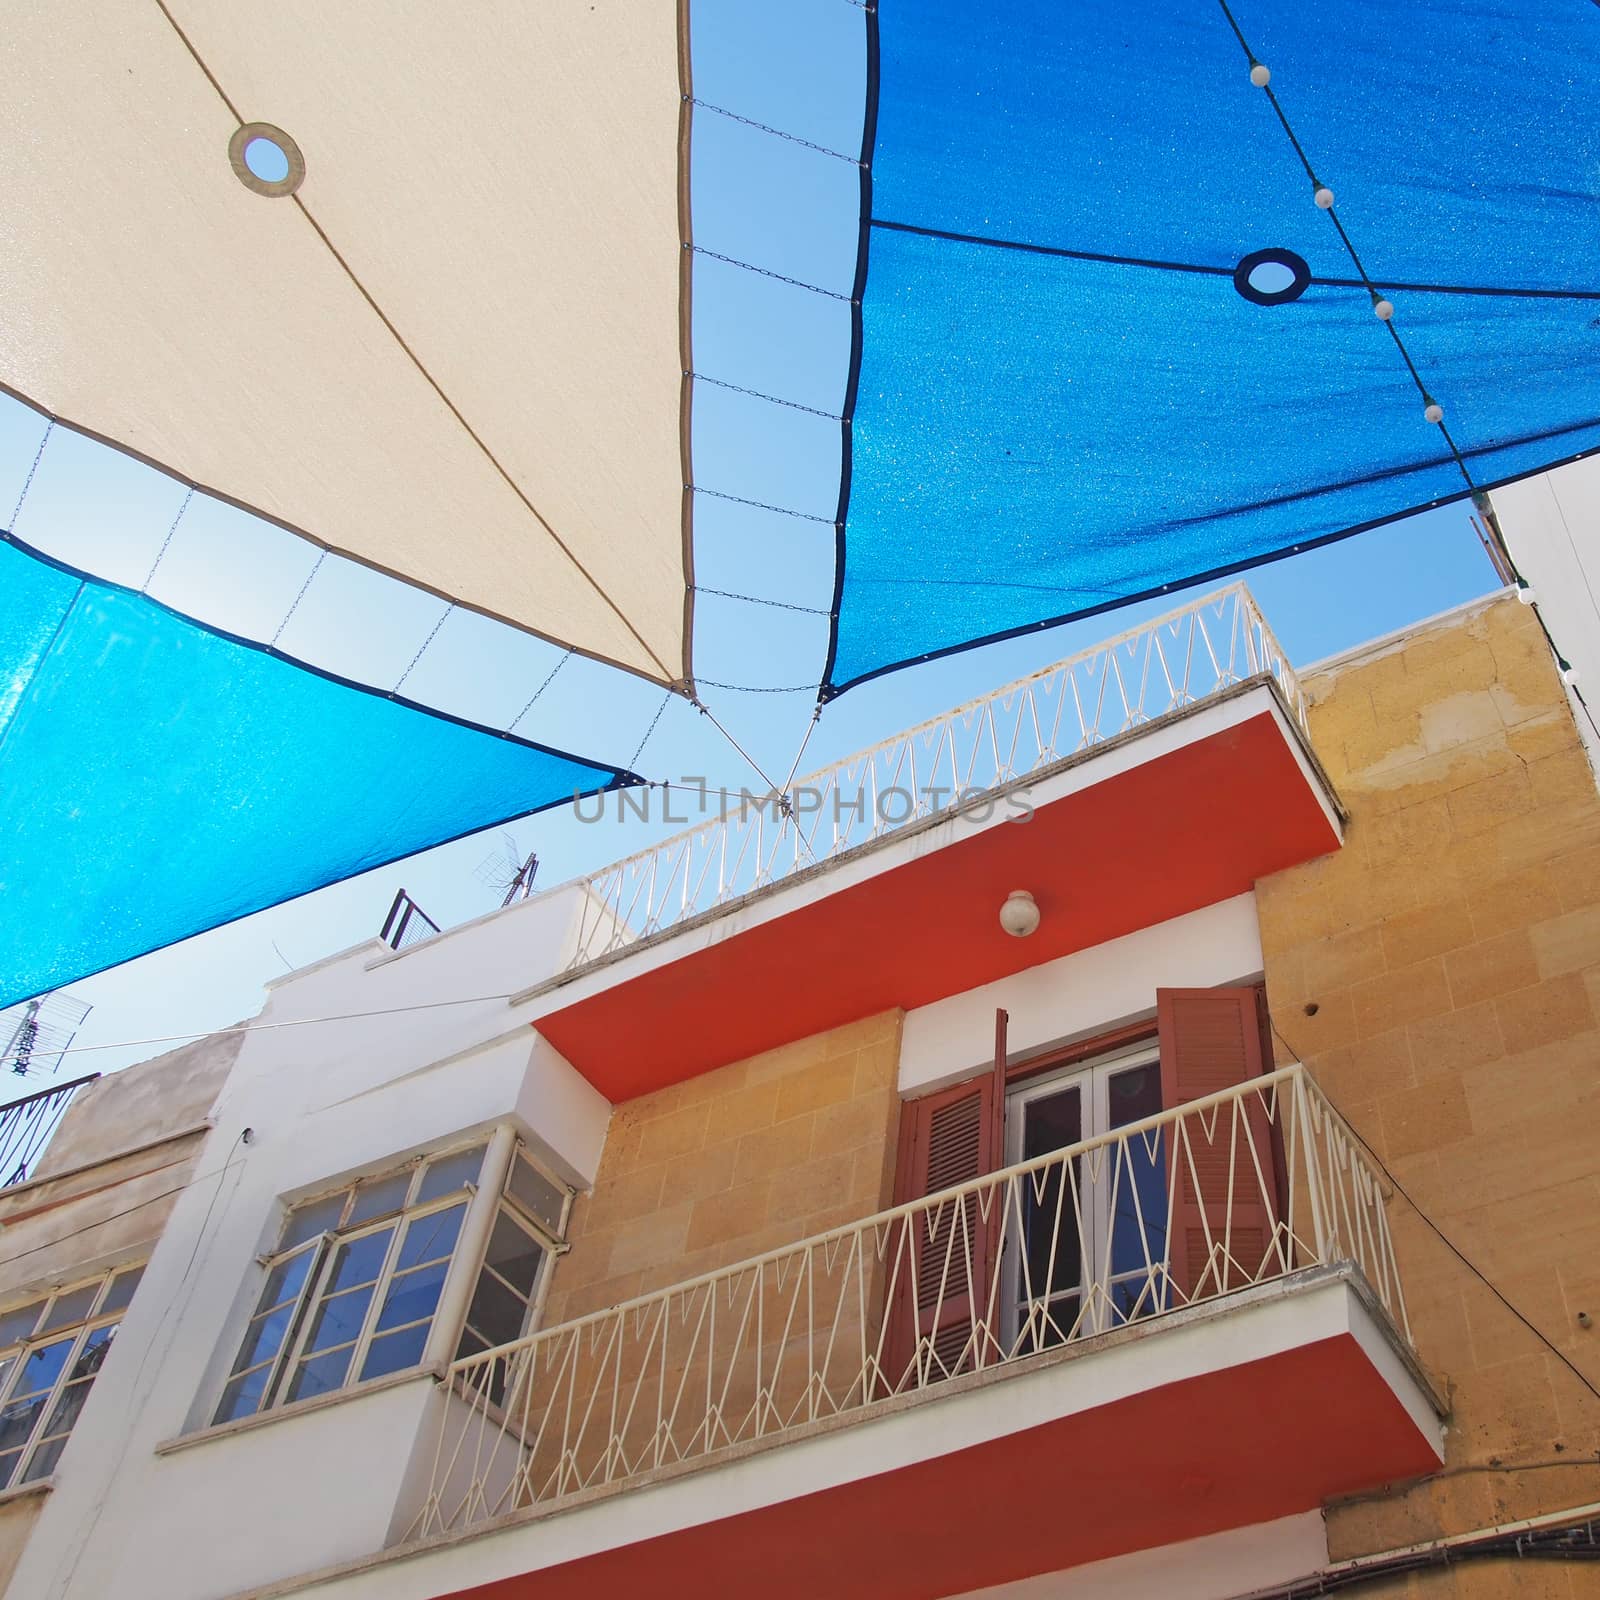 detail of a painted colourful street in the center of nicosia cyprus with blue and white shades covering the the road in bright summer sunlight by philopenshaw